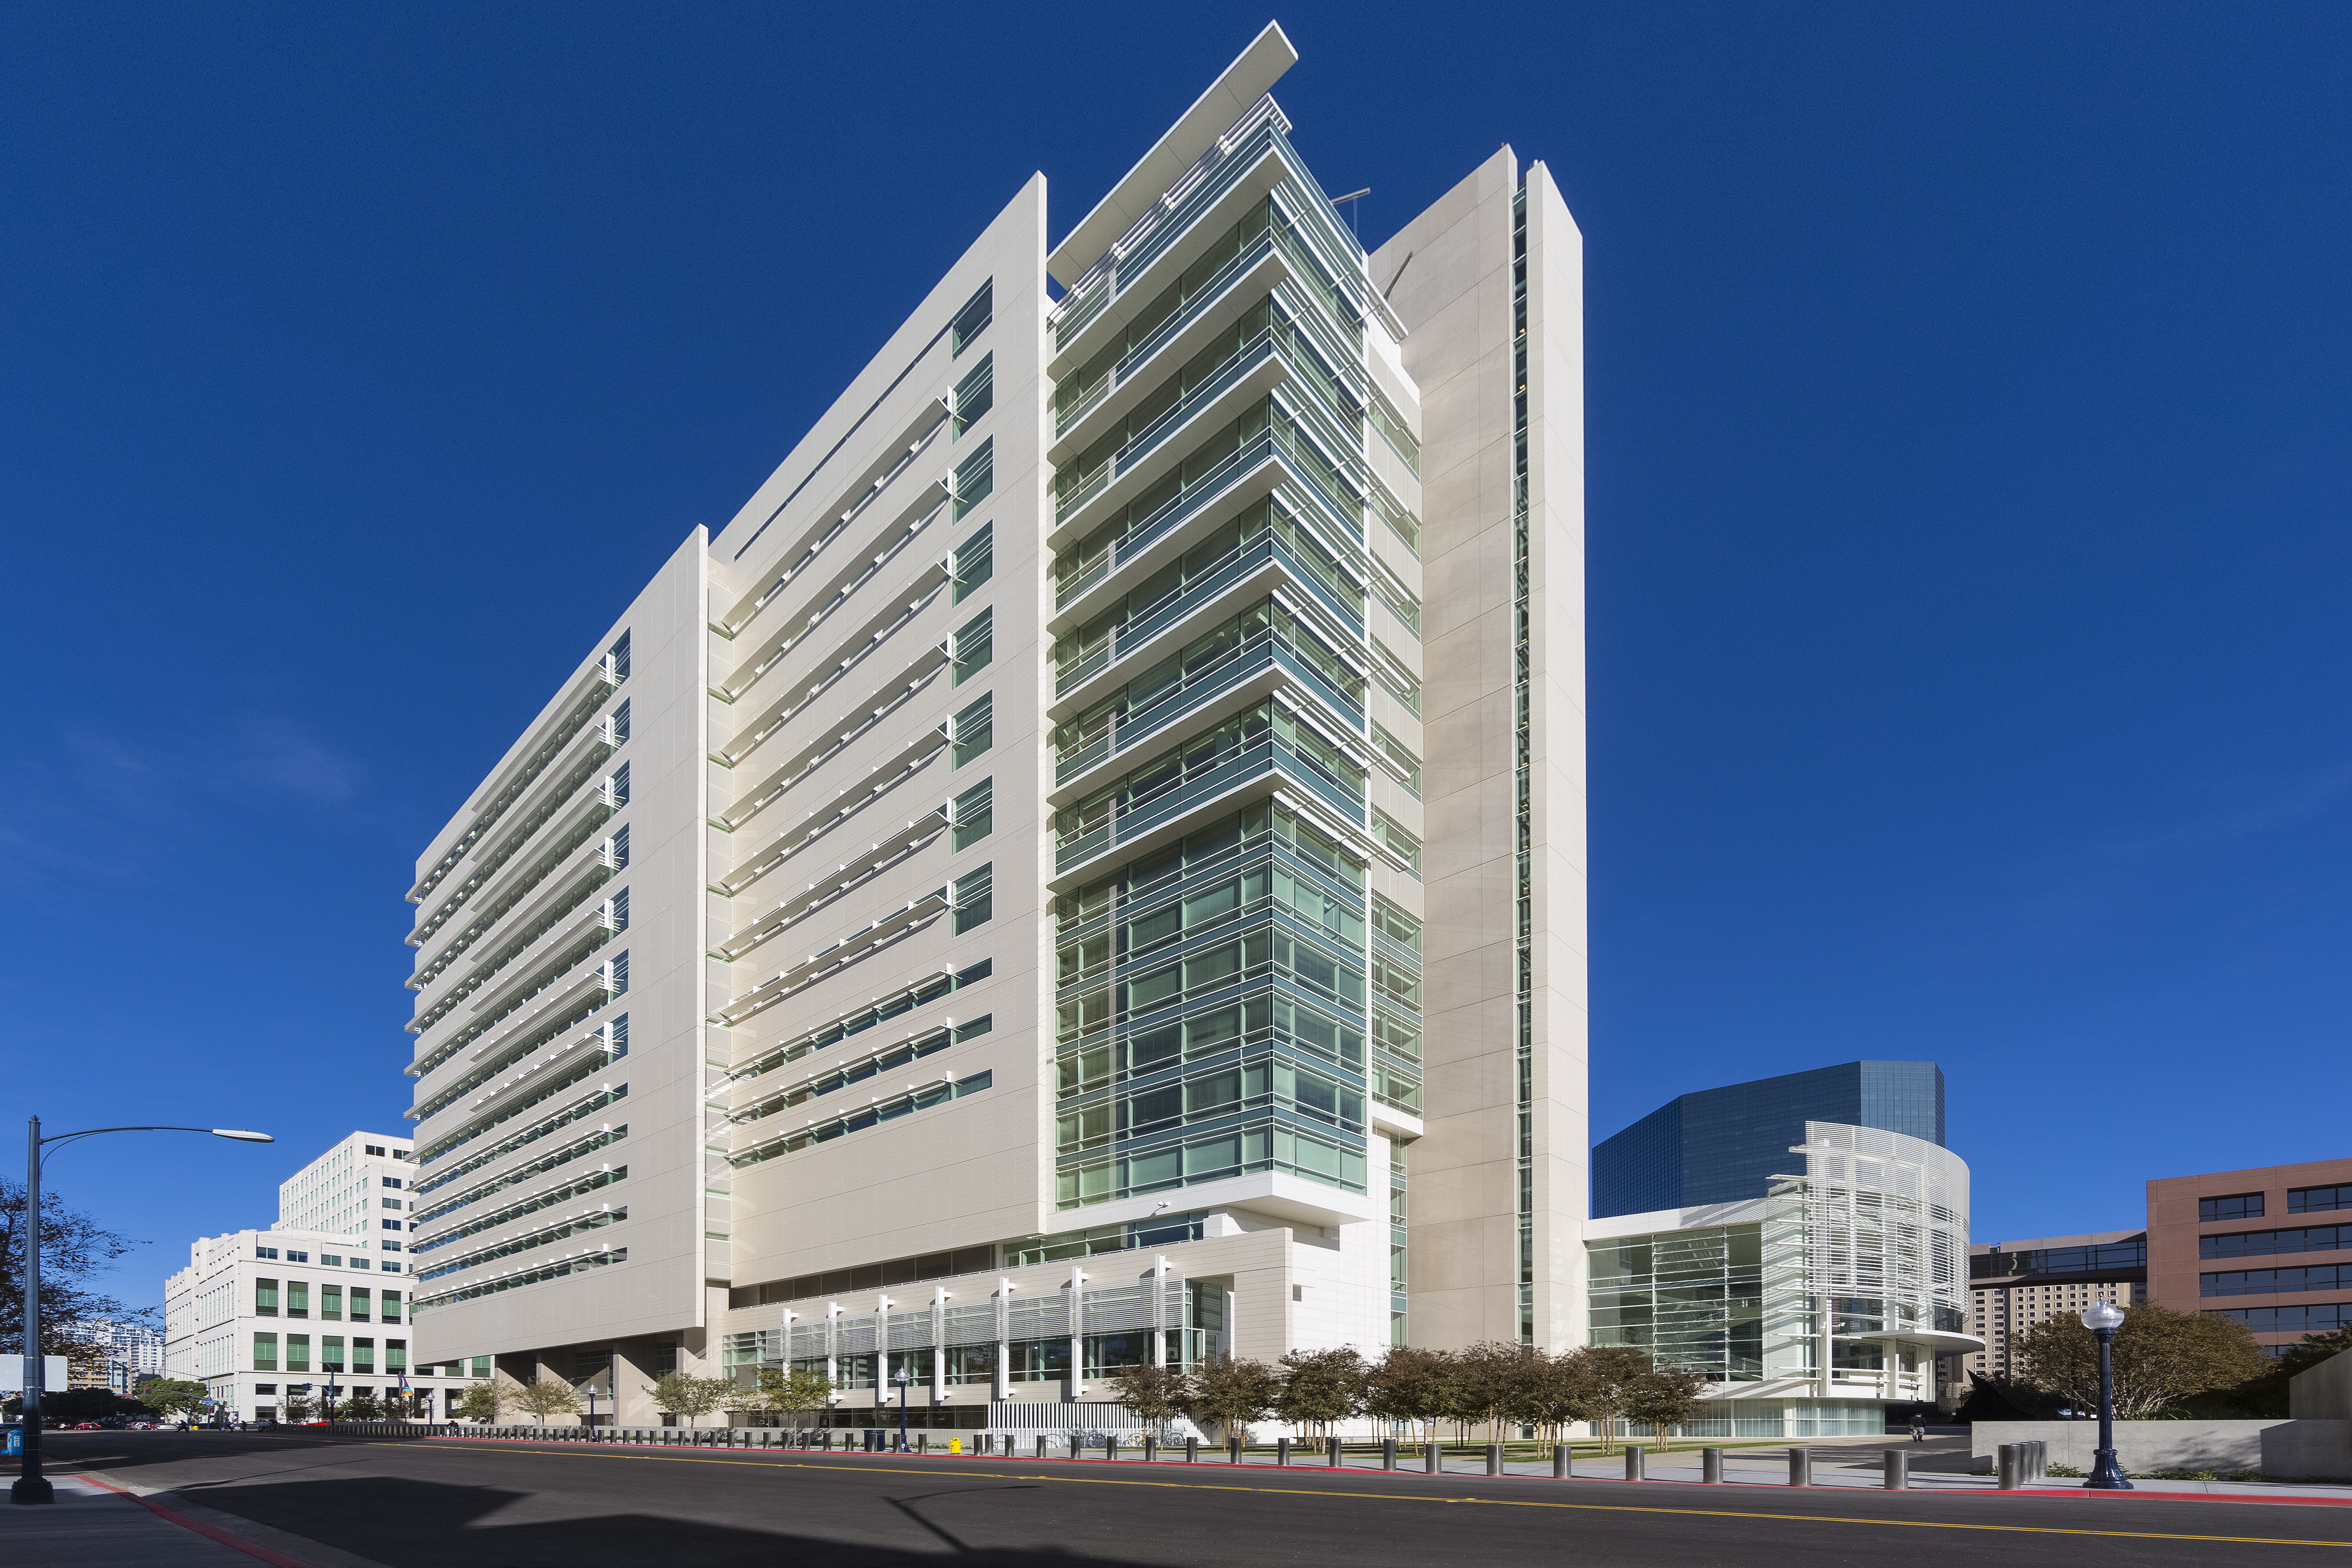 U.S. Courthouse, San Diego - 12 award-winning structural steel buildings